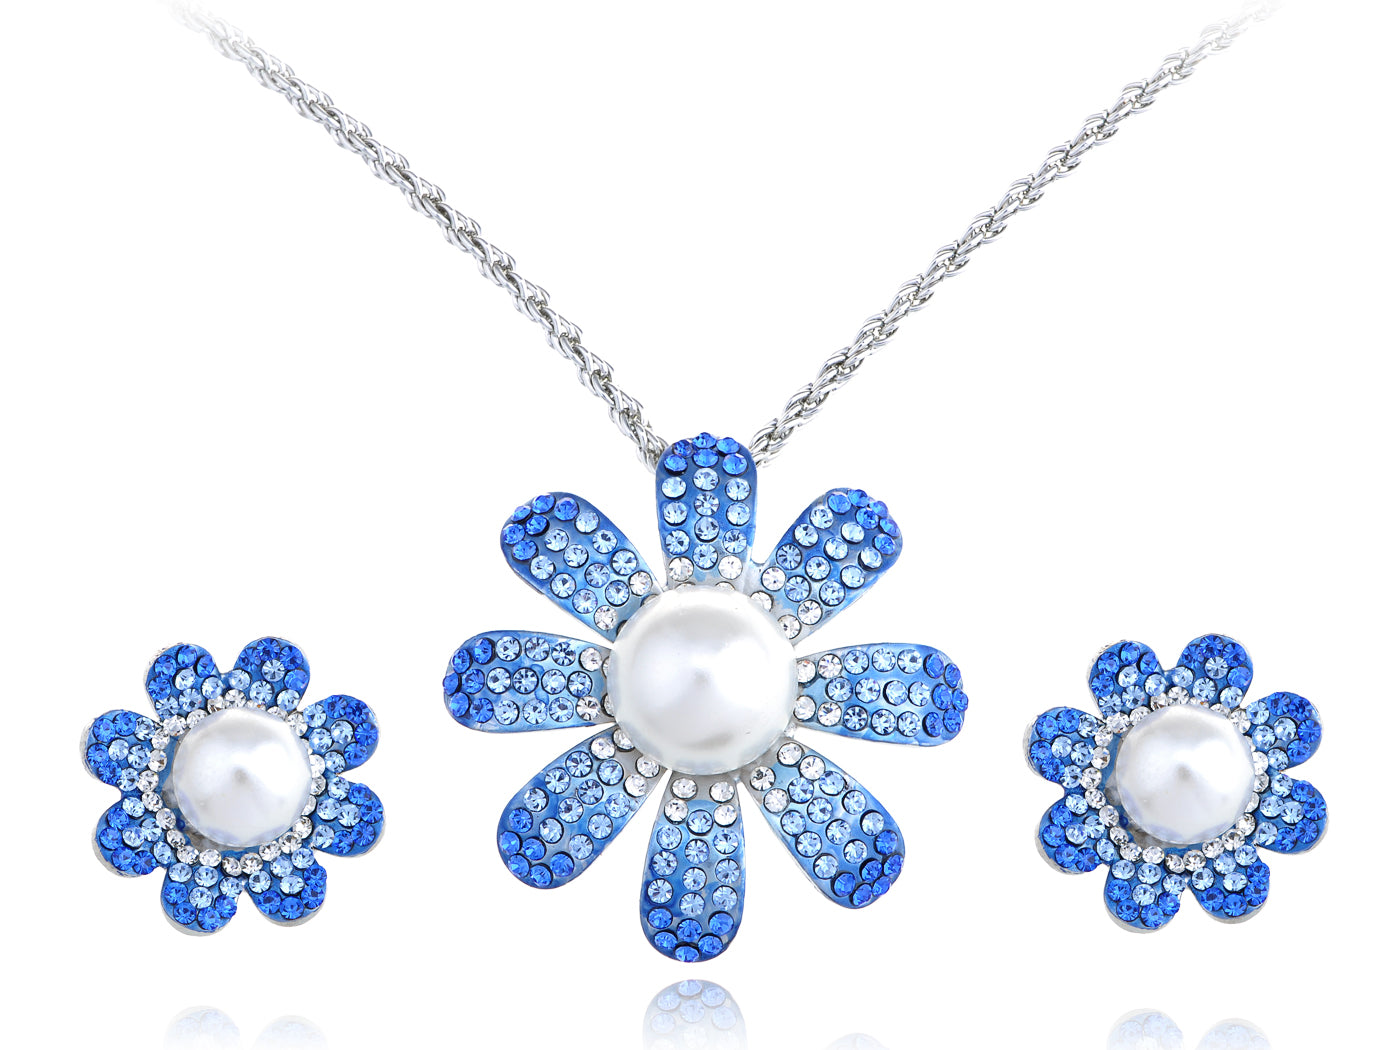 Swarovski Crystal Sapphire Pearl Center Daisy Element Earring Necklace Set